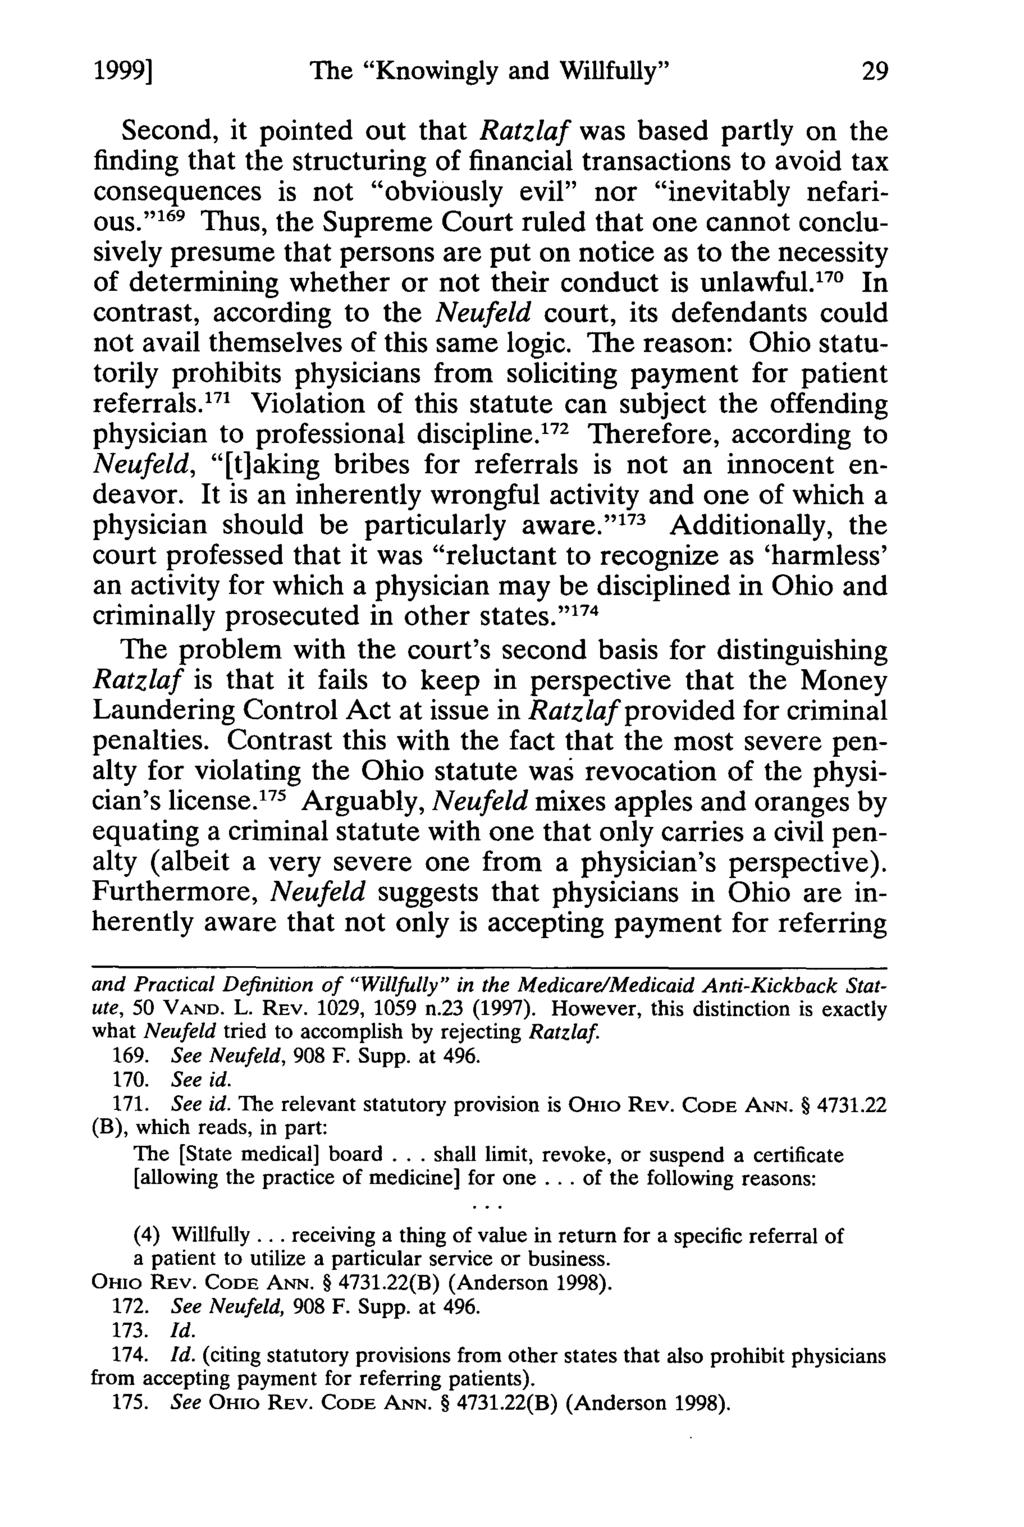 1999] Blair: The "Knowingly and Willfully" Continuum of the Anti-Kickback Stat The "Knowingly and Willfully" Second, it pointed out that Ratzlaf was based partly on the finding that the structuring